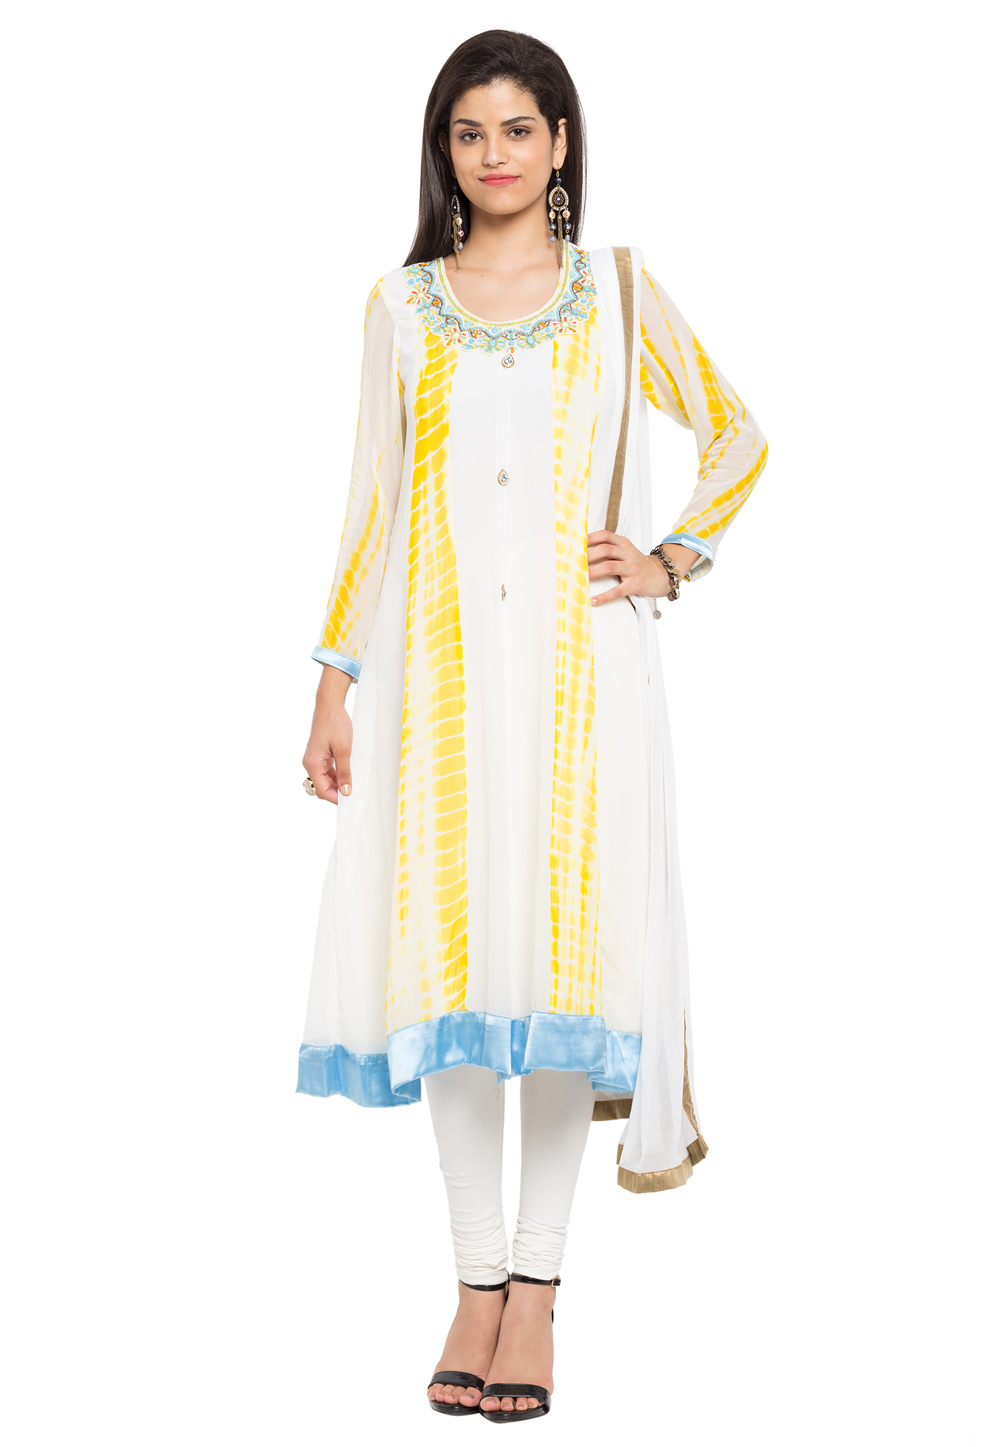 Off White Faux Georgette Readymade Churidar Suit 230455